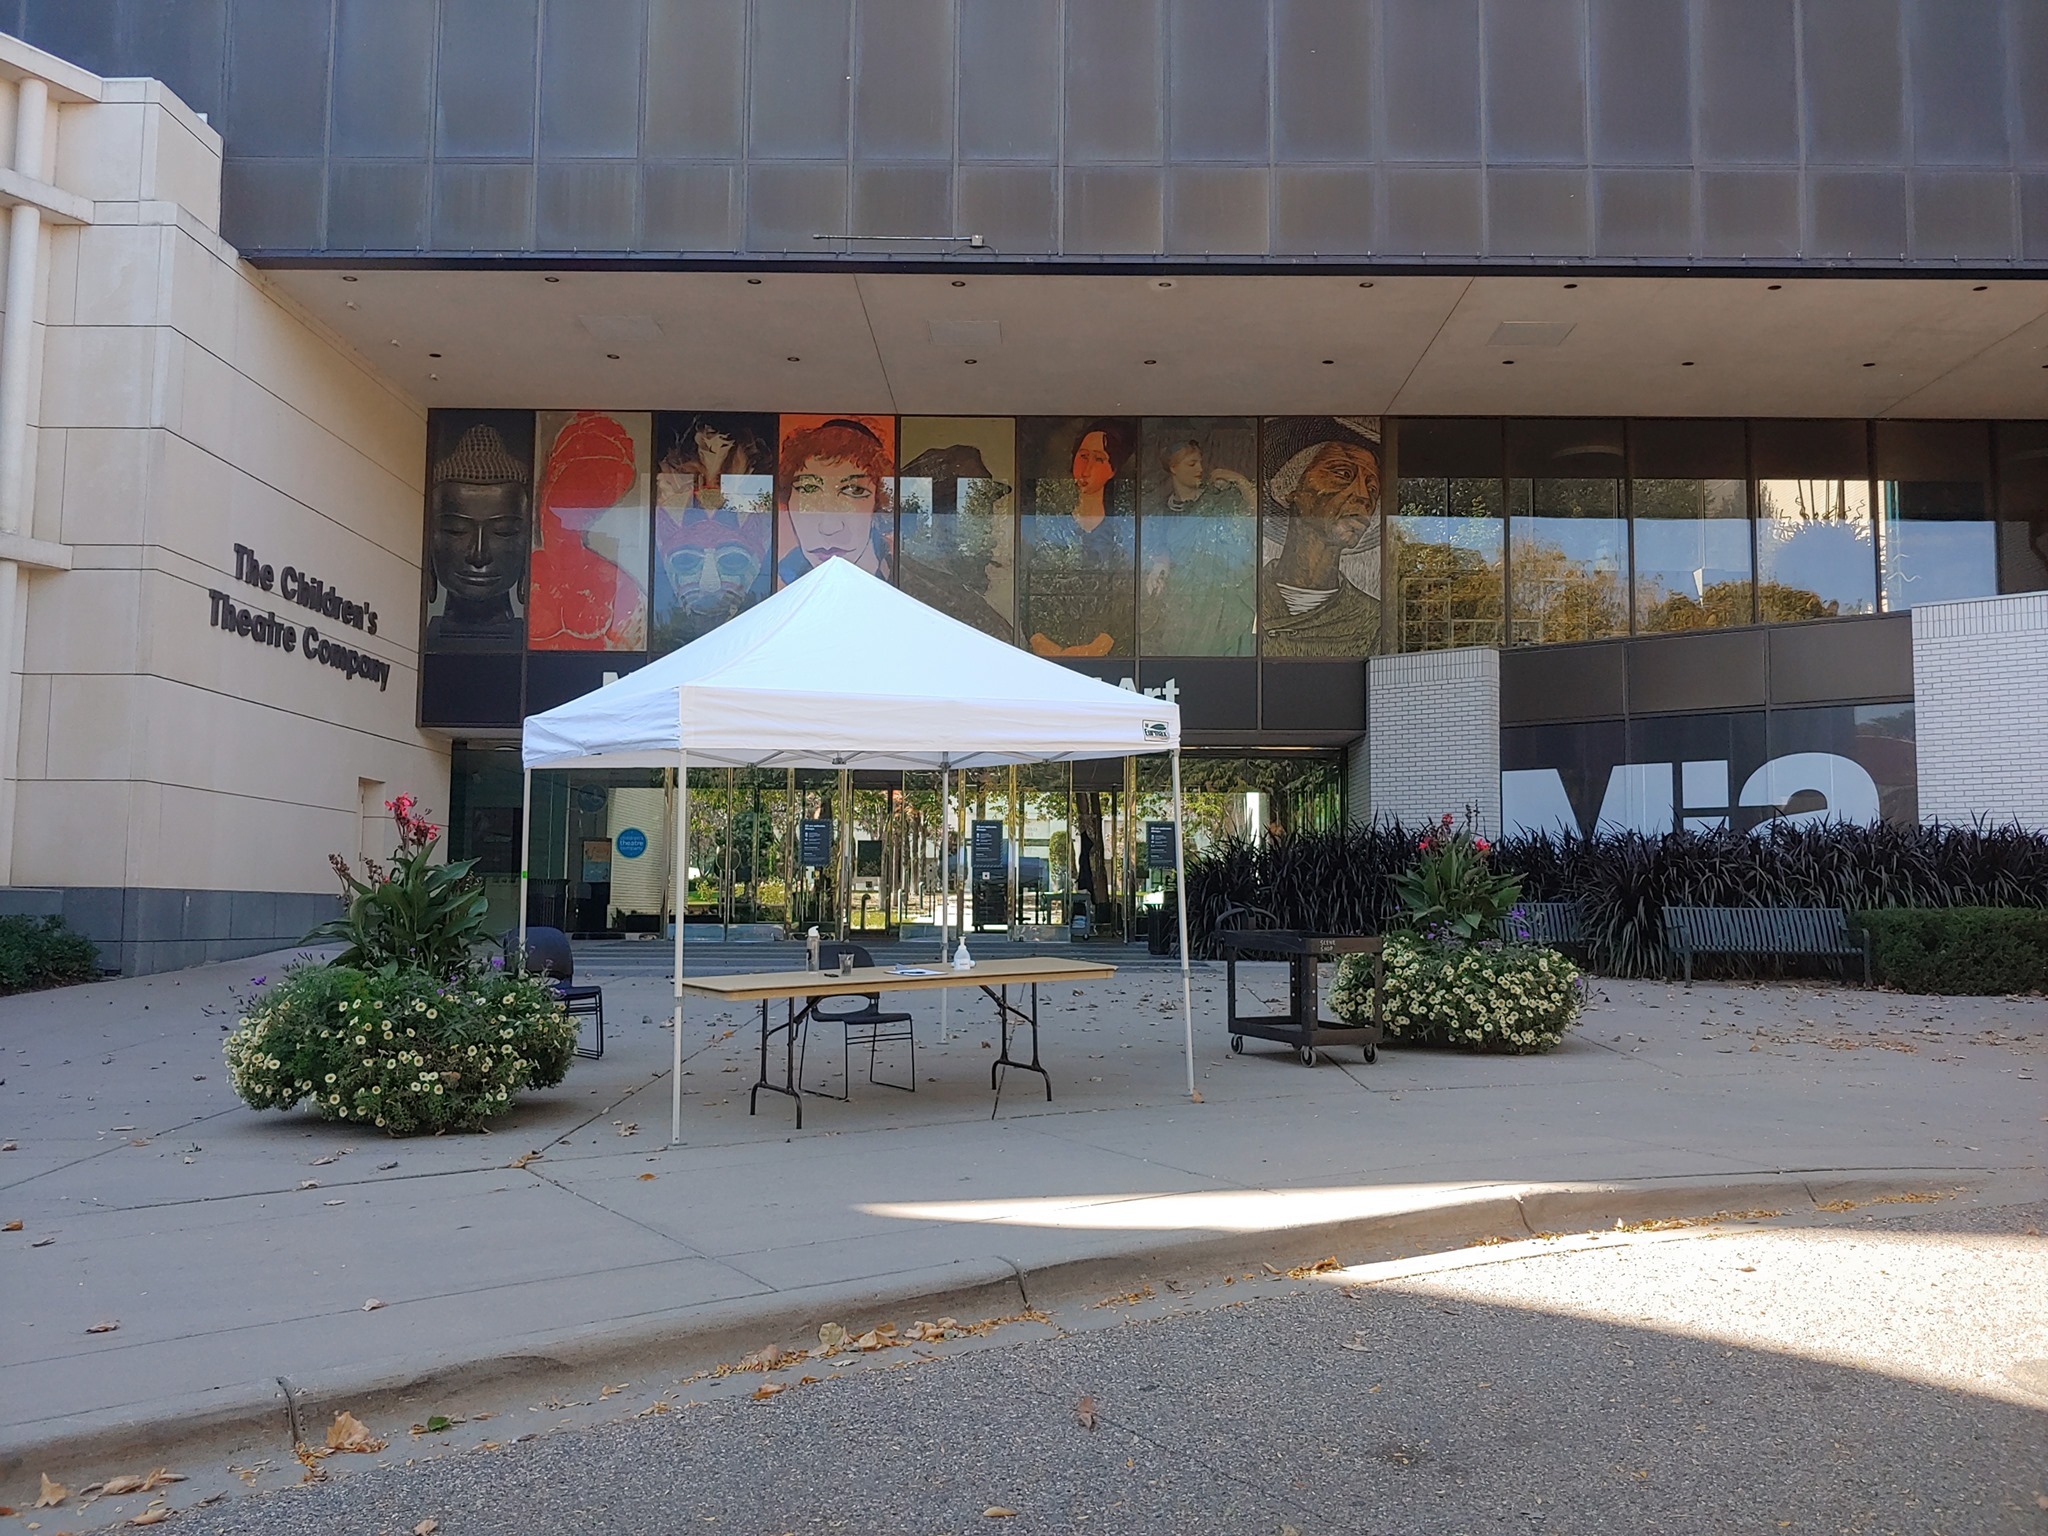 The outside of Children's Theater Company in Minneapolis, with a tent set up for donations.